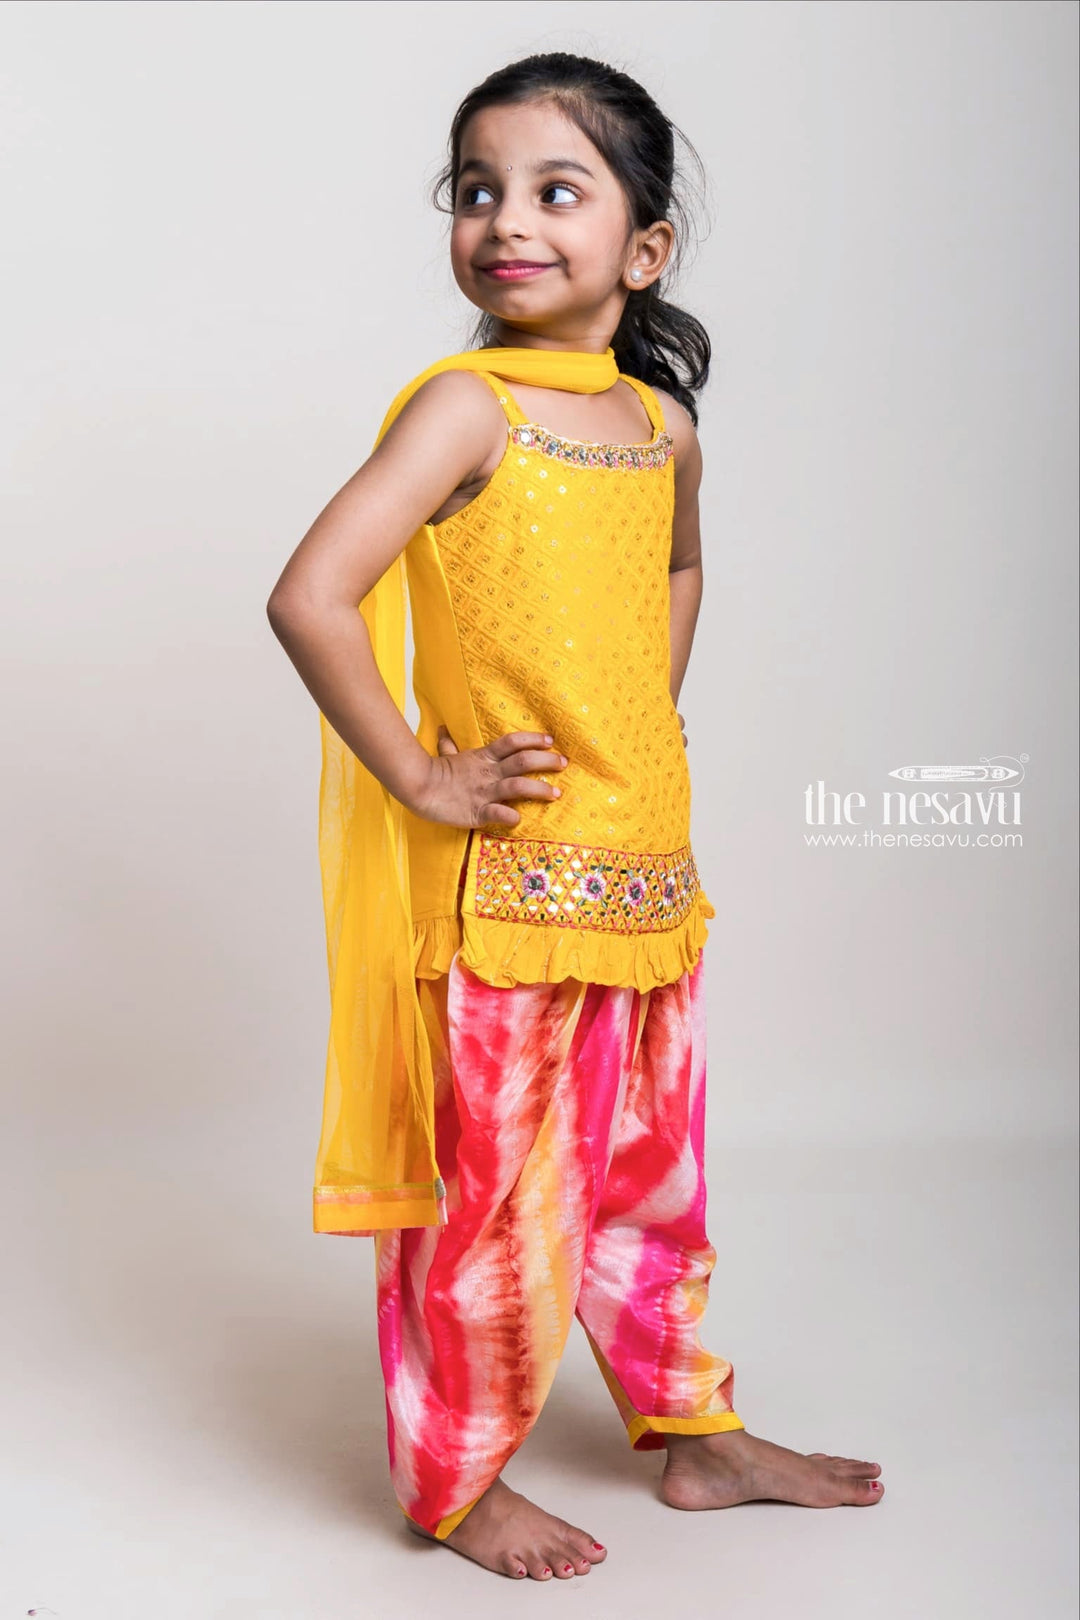 The Nesavu Girls Dothi Sets Yellow Sequenced Top With Tie And Dyed Patiala Pants For Girls Nesavu Vibrant Yellow Short Tops And Patiala Pants| Latest Design| The Nesavu